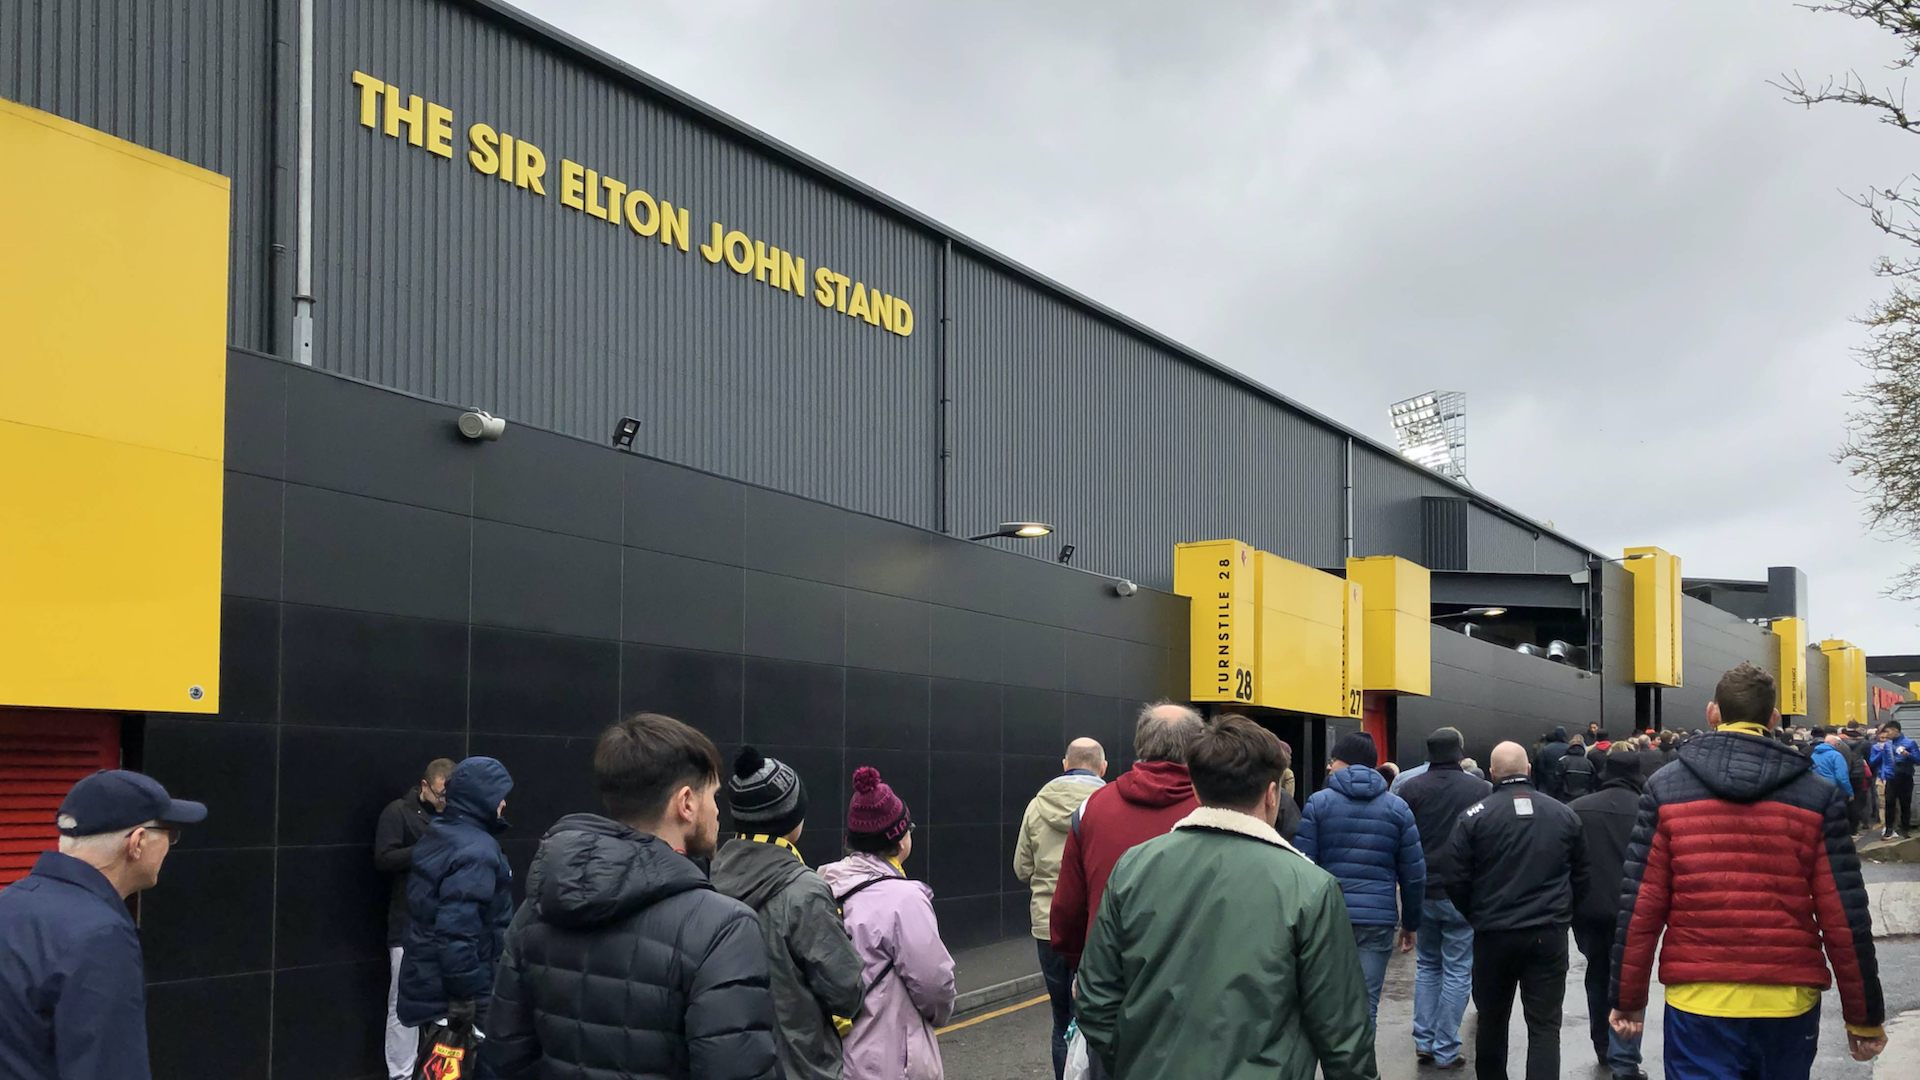 Watford fans go into the Sir Elton John stand 